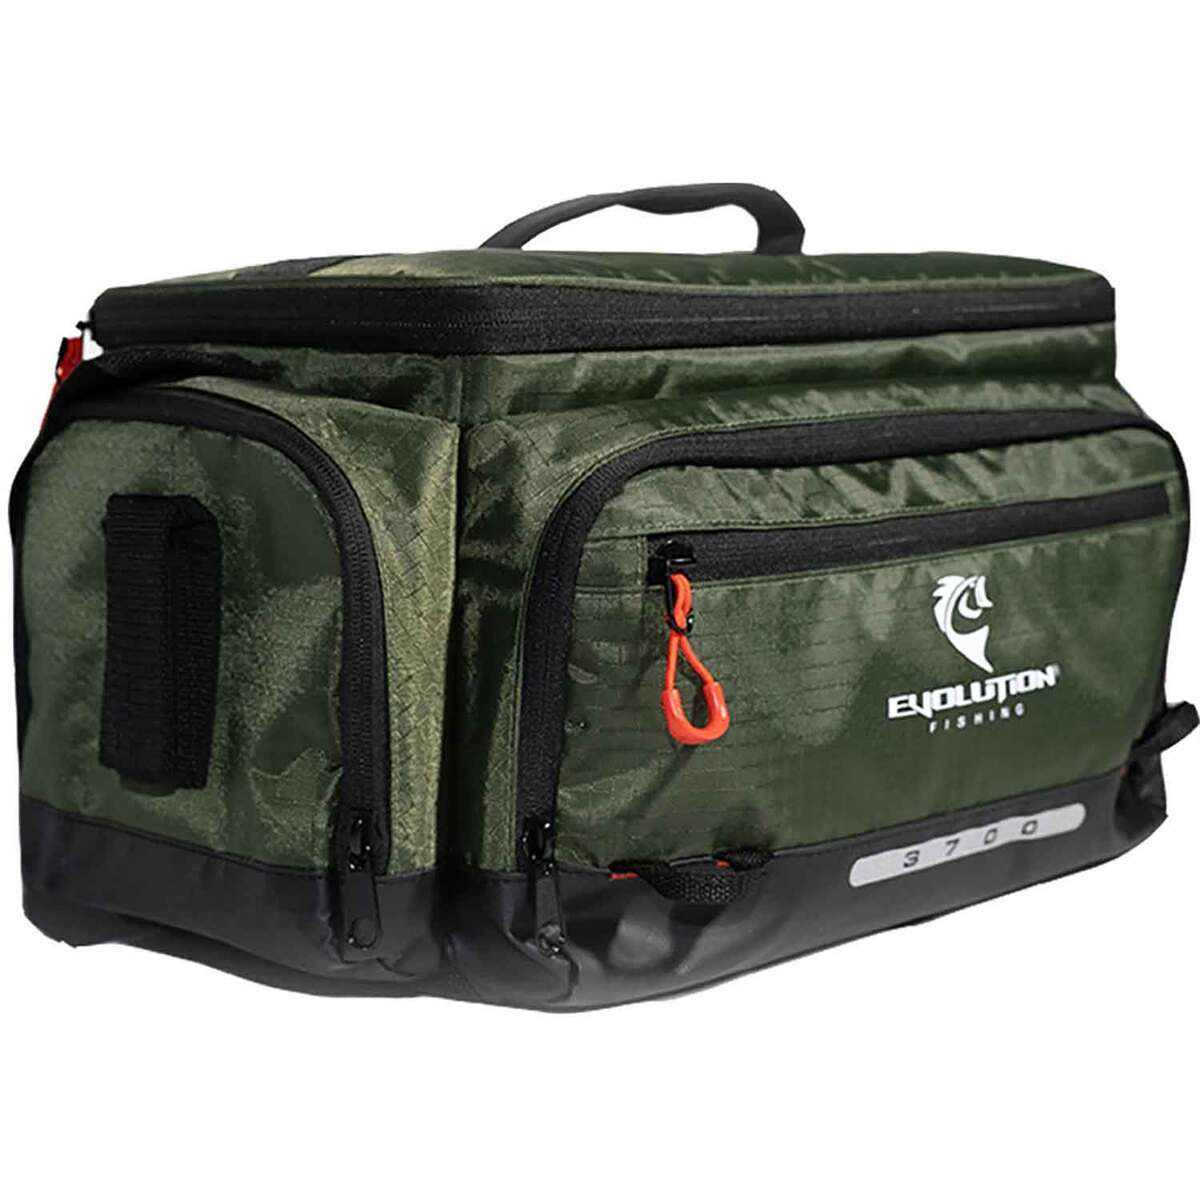 Evolution Outdoor 3700 Smallmouth Soft Tackle Bag - Olive Drab